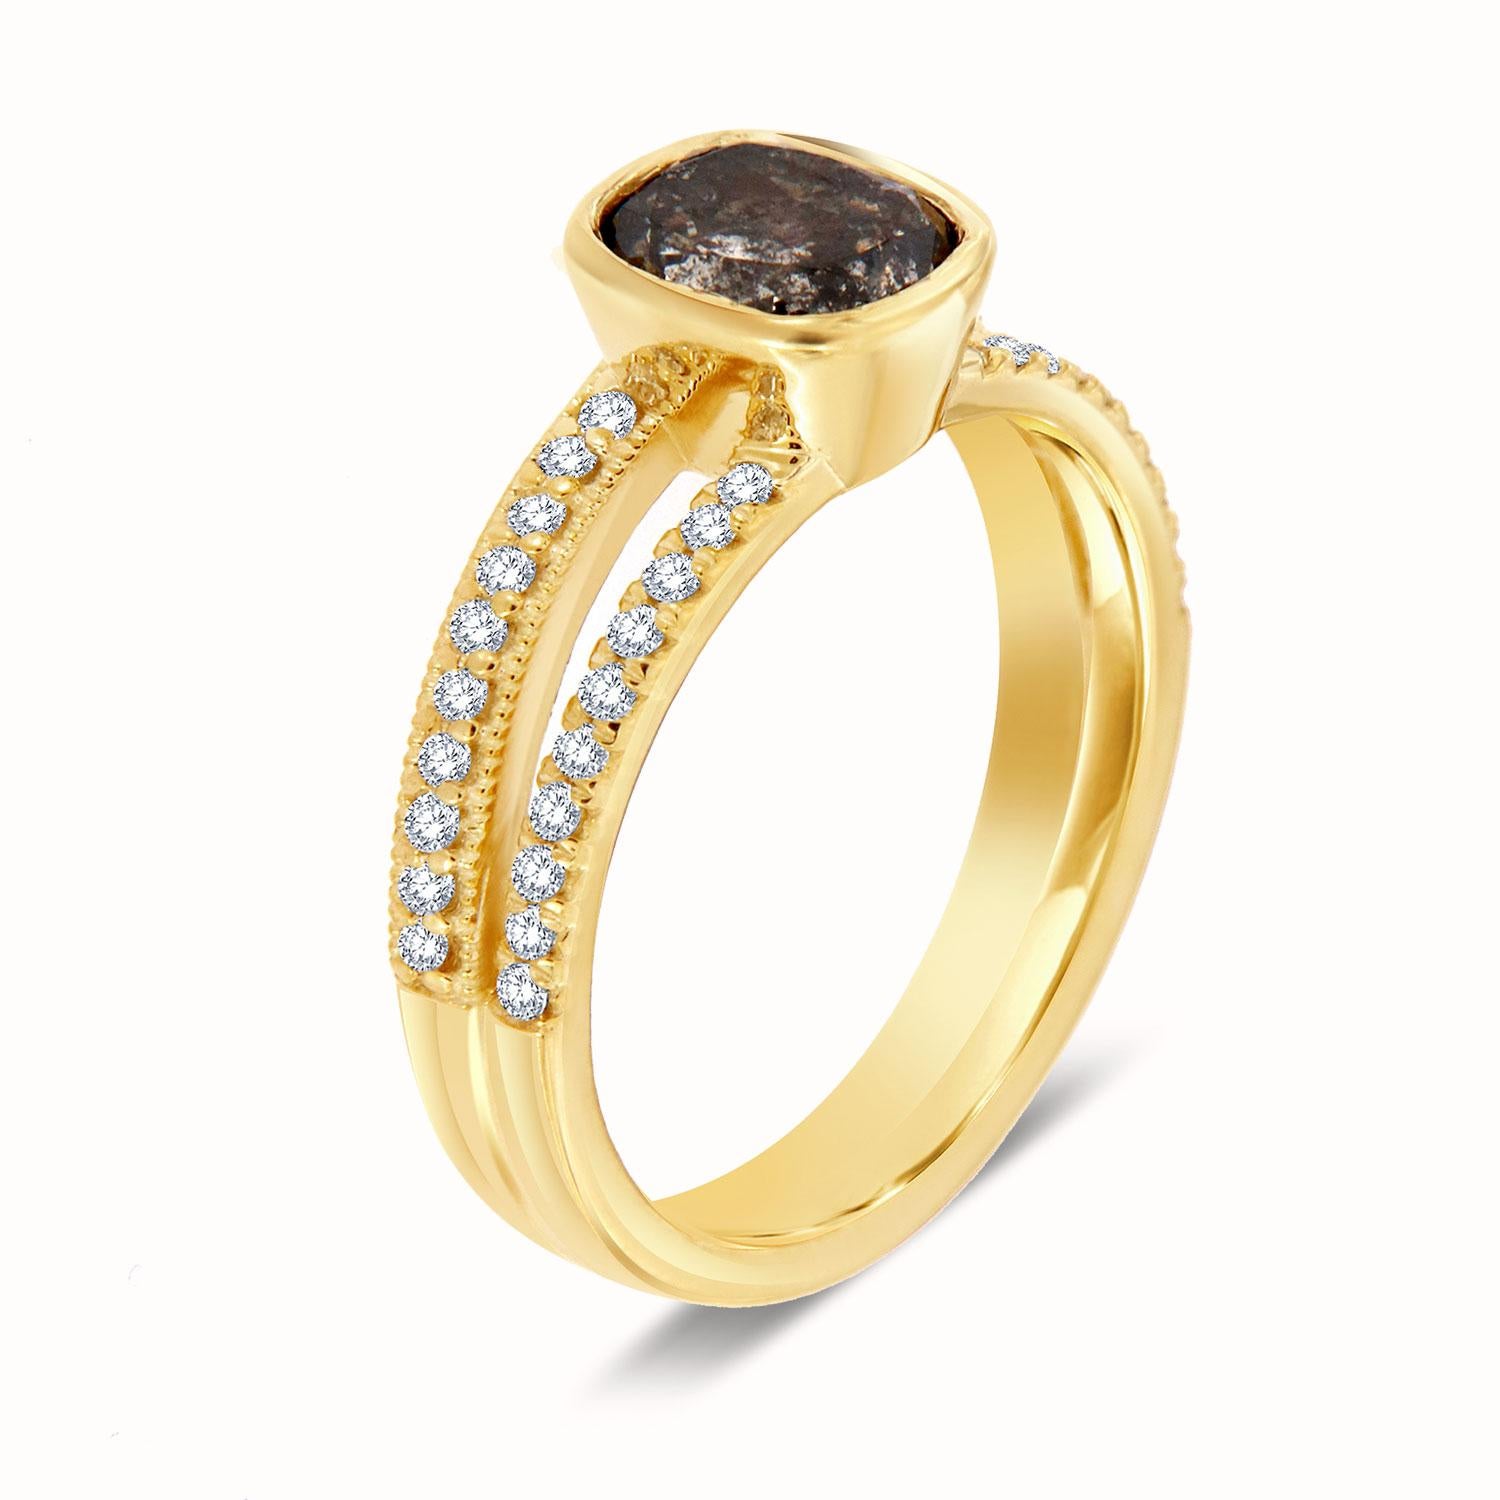 This Organically designed ring features forthy (40) round brilliant Micro-Prong set on two unevenly split shanks to create the perfect imbalance. A 1.42 Cushion Shaped Salt and Pepper diamond bezel set on top of the uneven shank. The light milgrain